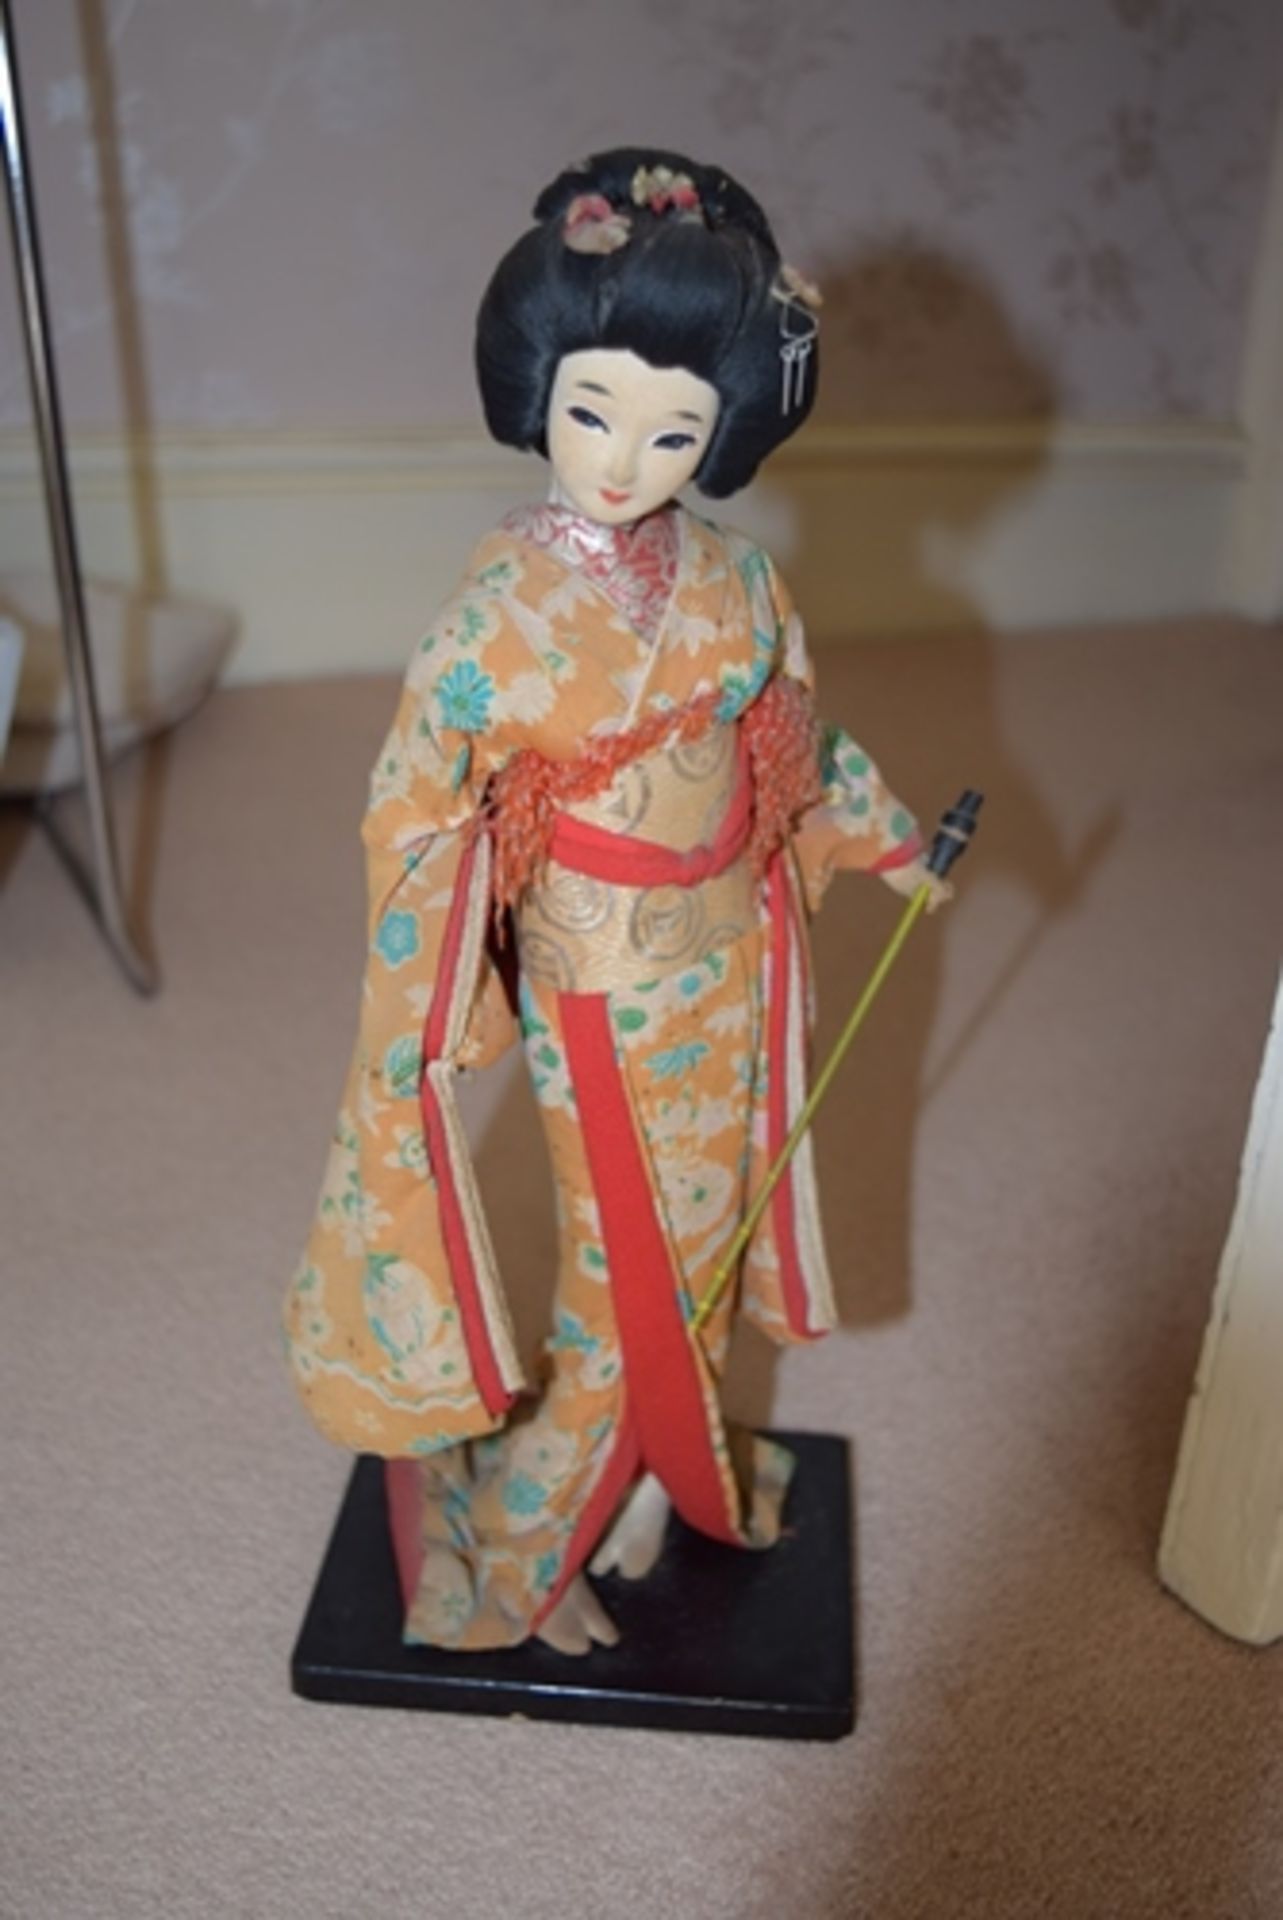 Japanese traditional lady doll in original condition, dressed in kimono and on a stand. Approx 15"- - Image 2 of 4